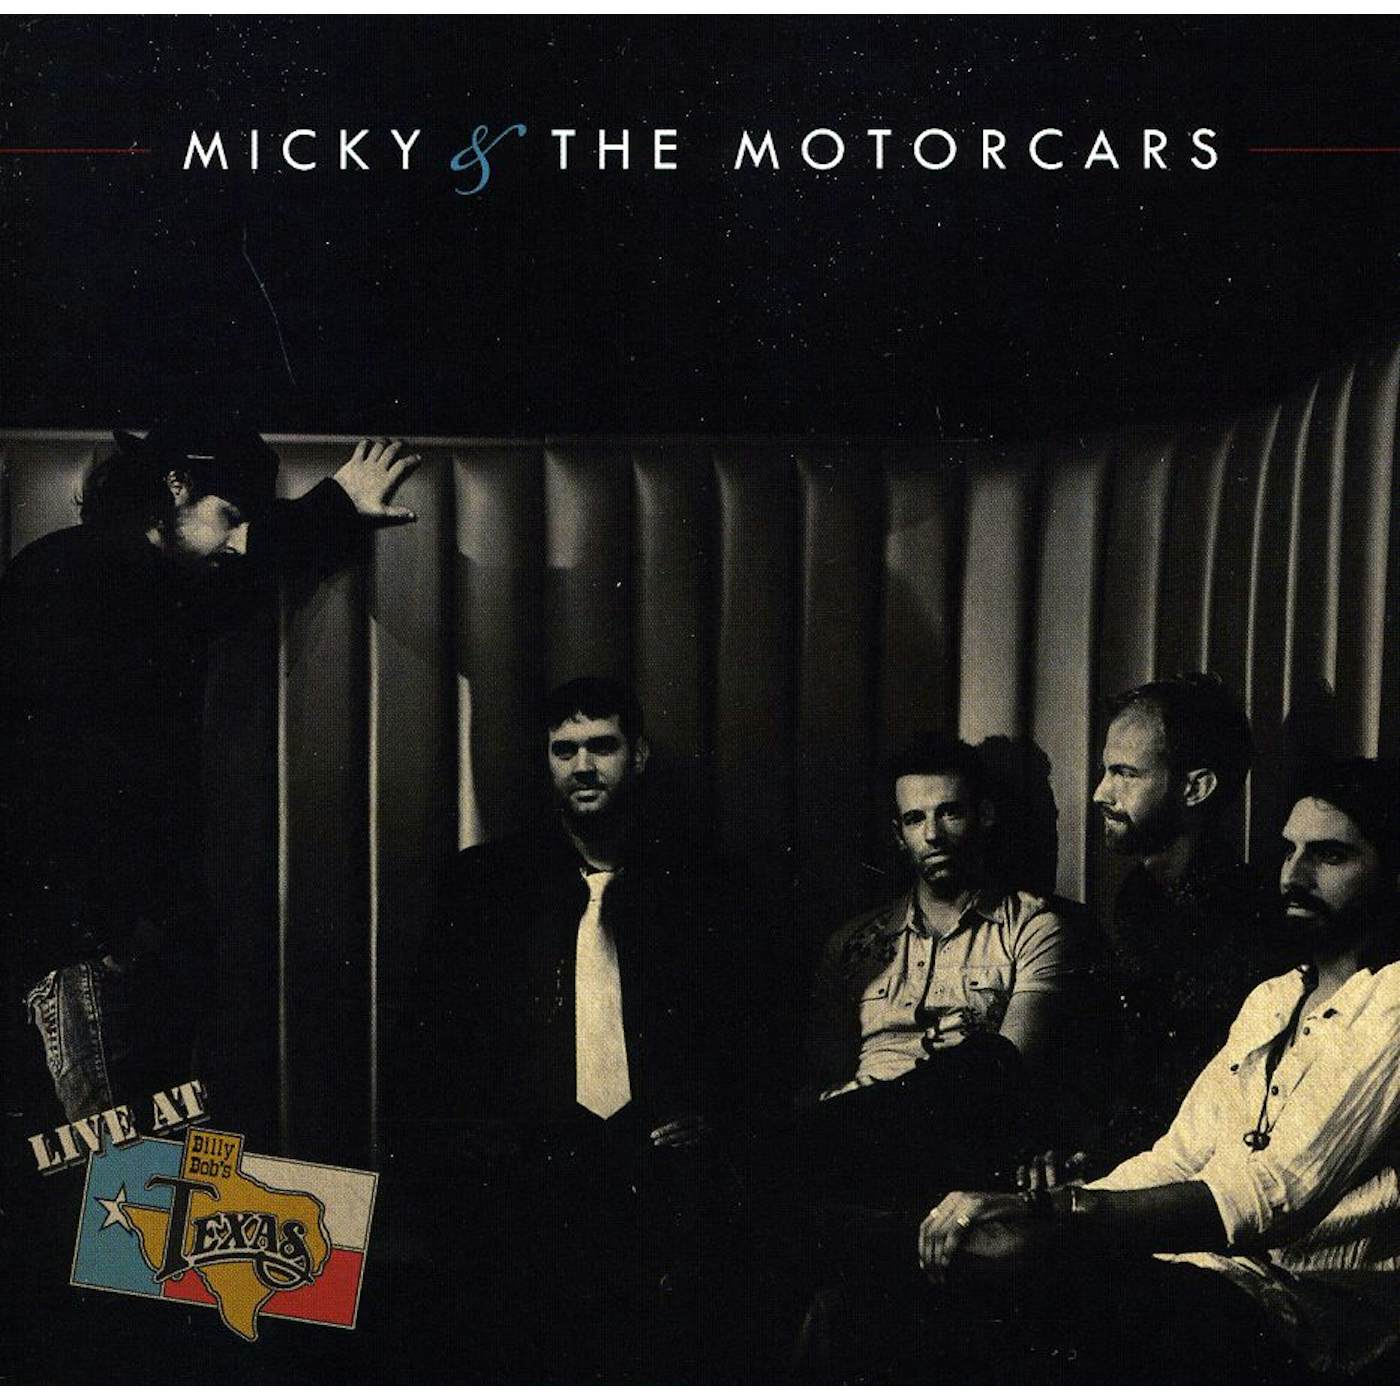 Micky & The Motorcars LIVE AT BILLY BOB'S TEXAS CD